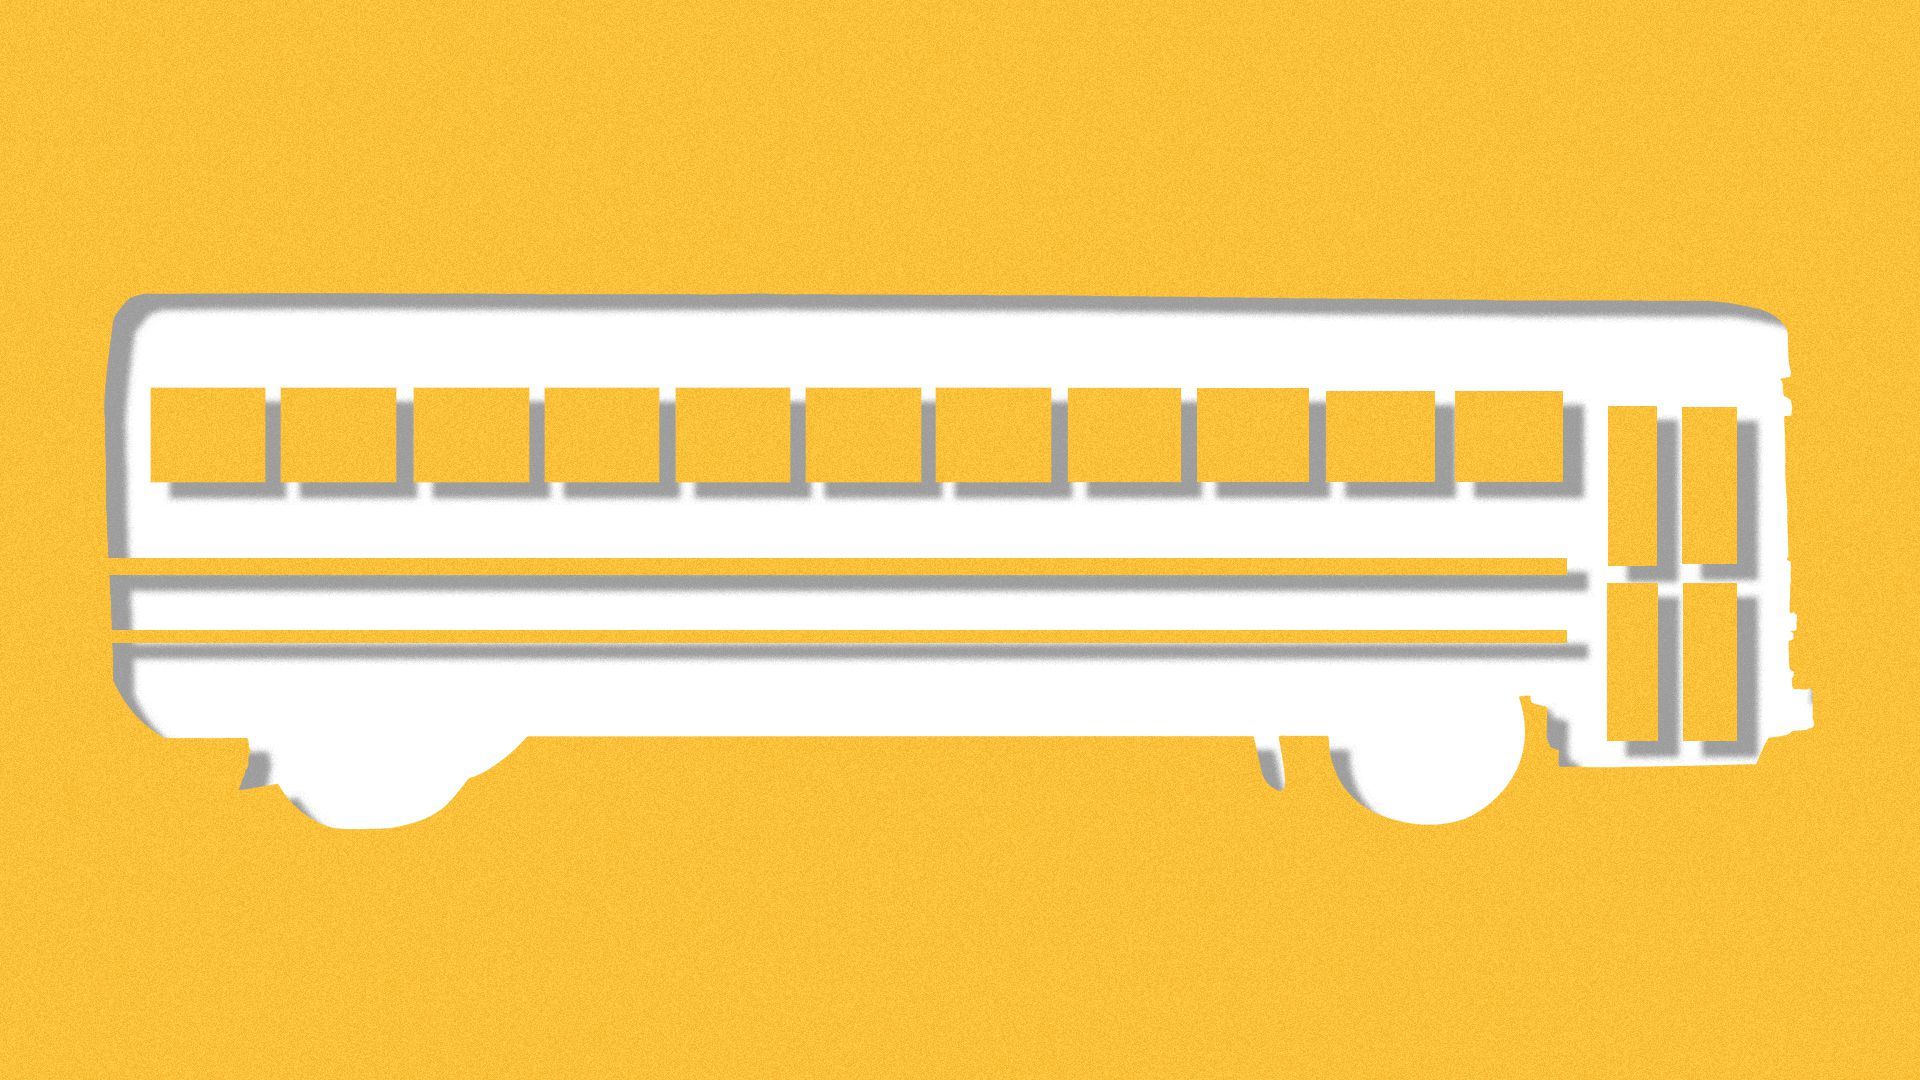 Illustration of a school bus cut out from a bright yellow background.